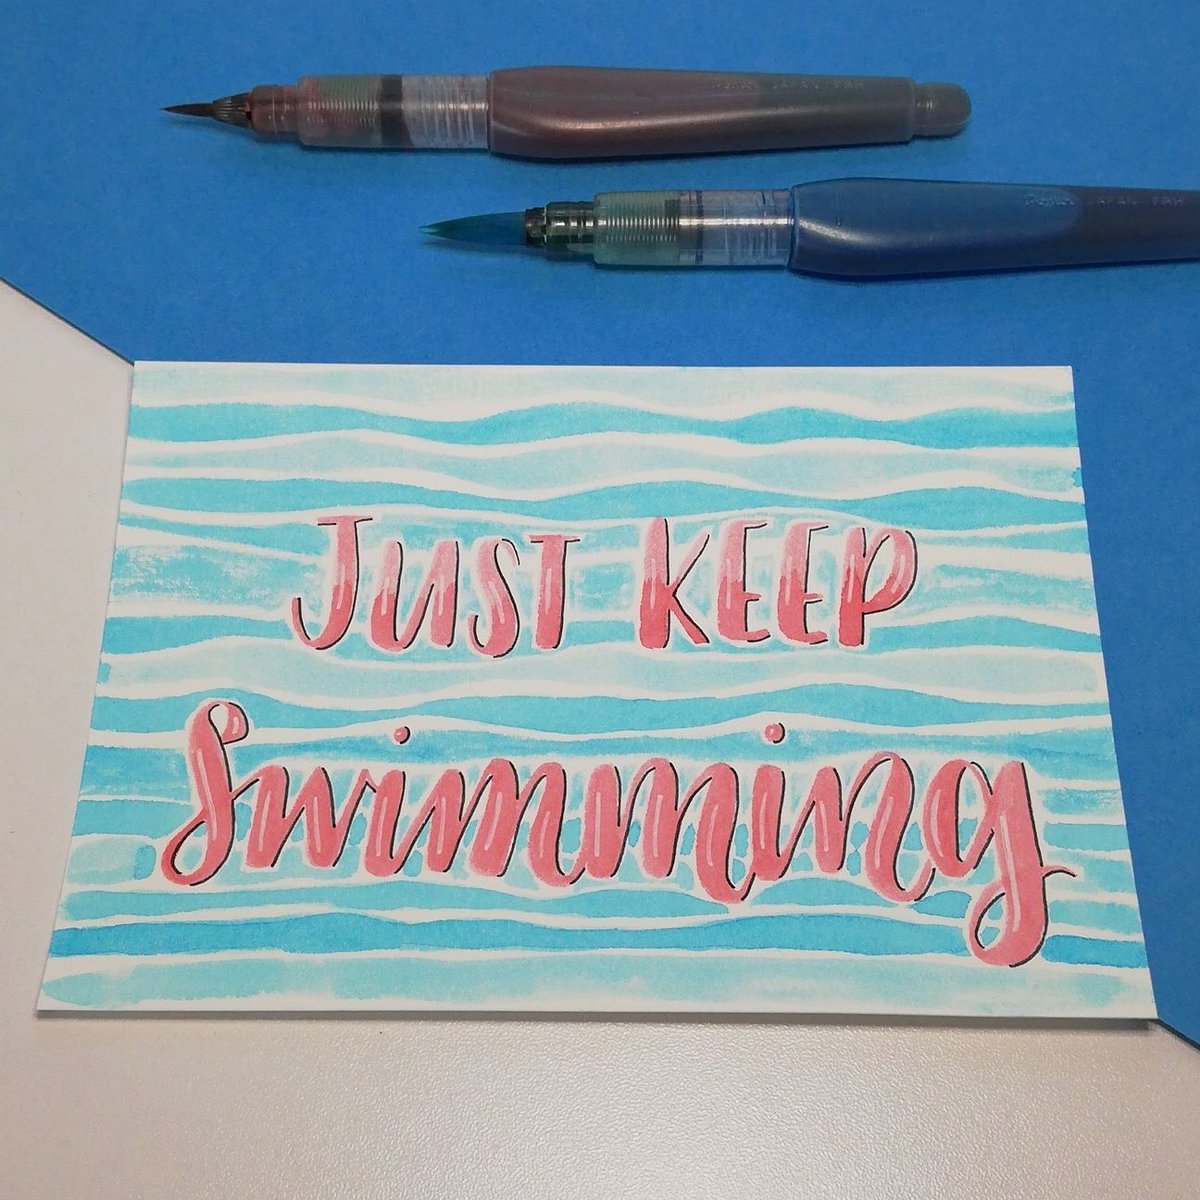 Just keep swimming! 🐟 Whatever is going on, it won't last forever. Our struggles, our poor health, our mistakes... It all passes and things will get better again. Just keep going!

🌼 ChronicallyHopeful.com/art
#watercolour #Lettering #brushlettering #ArtTherapy #ArtAsTherapy #pwME